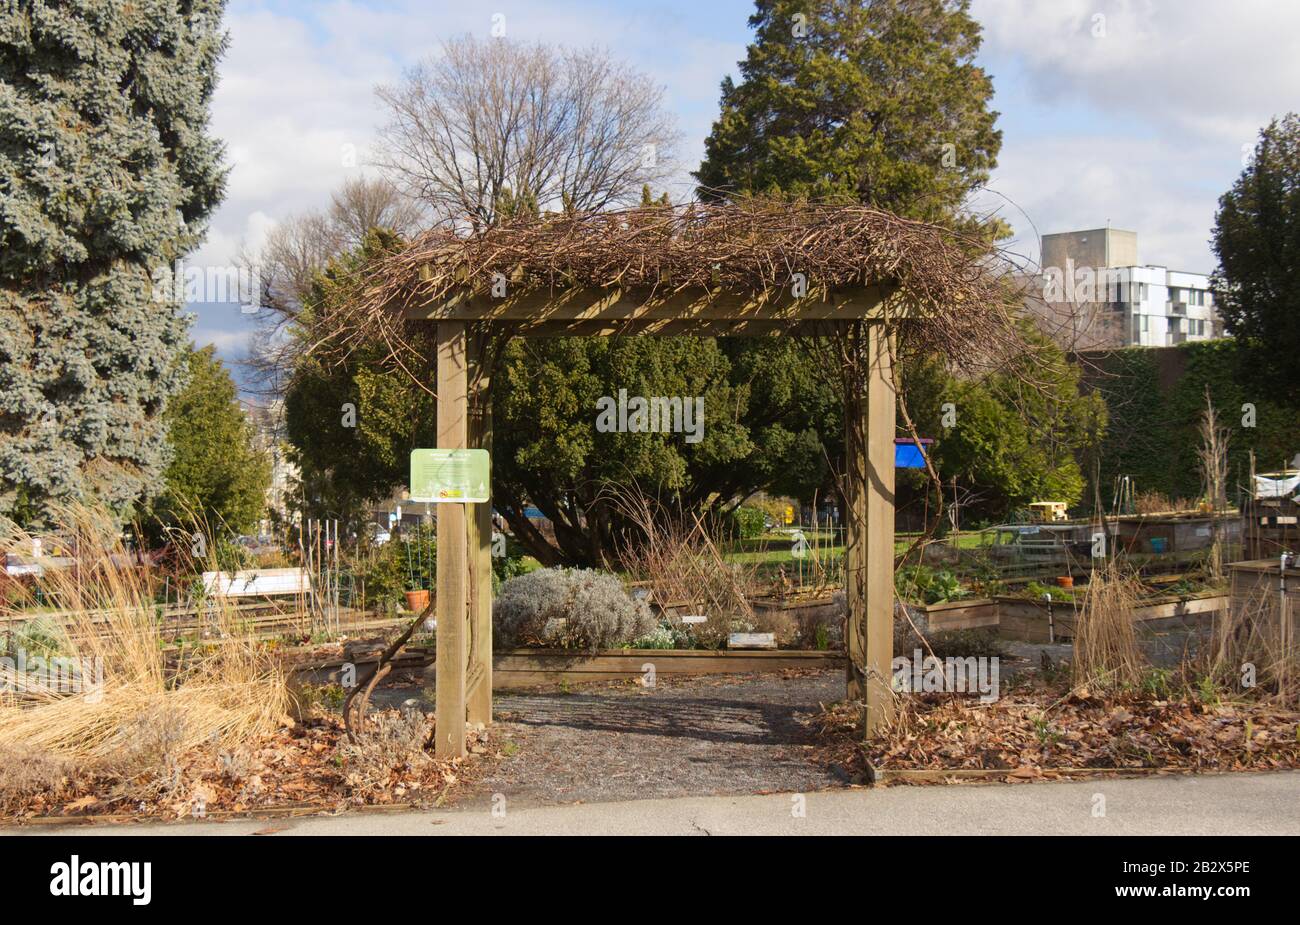 Community Garden Sign High Resolution Stock Photography And Images Alamy